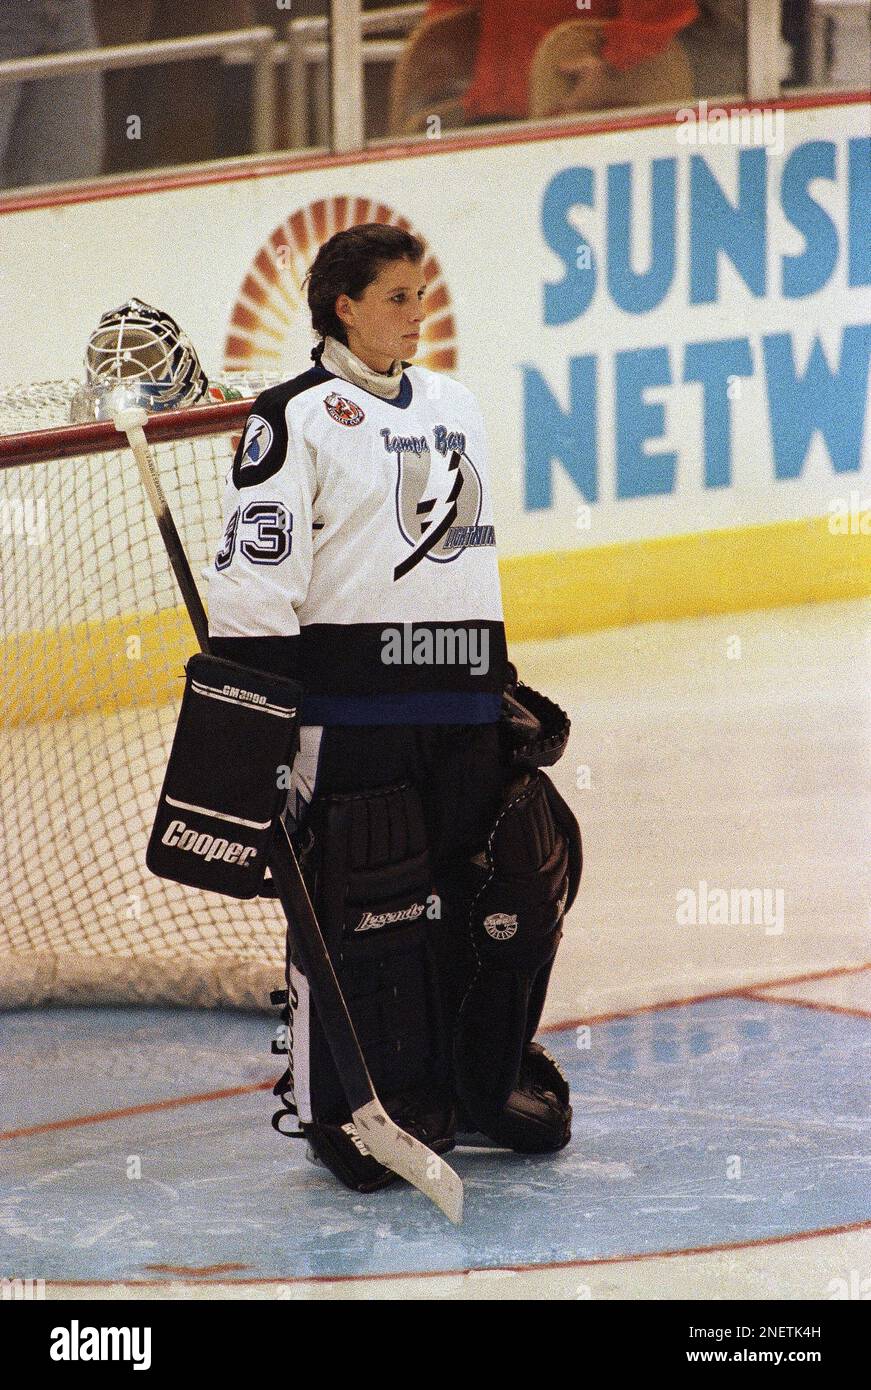 Manon Rheaume was the first woman and only woman to play in an NHL